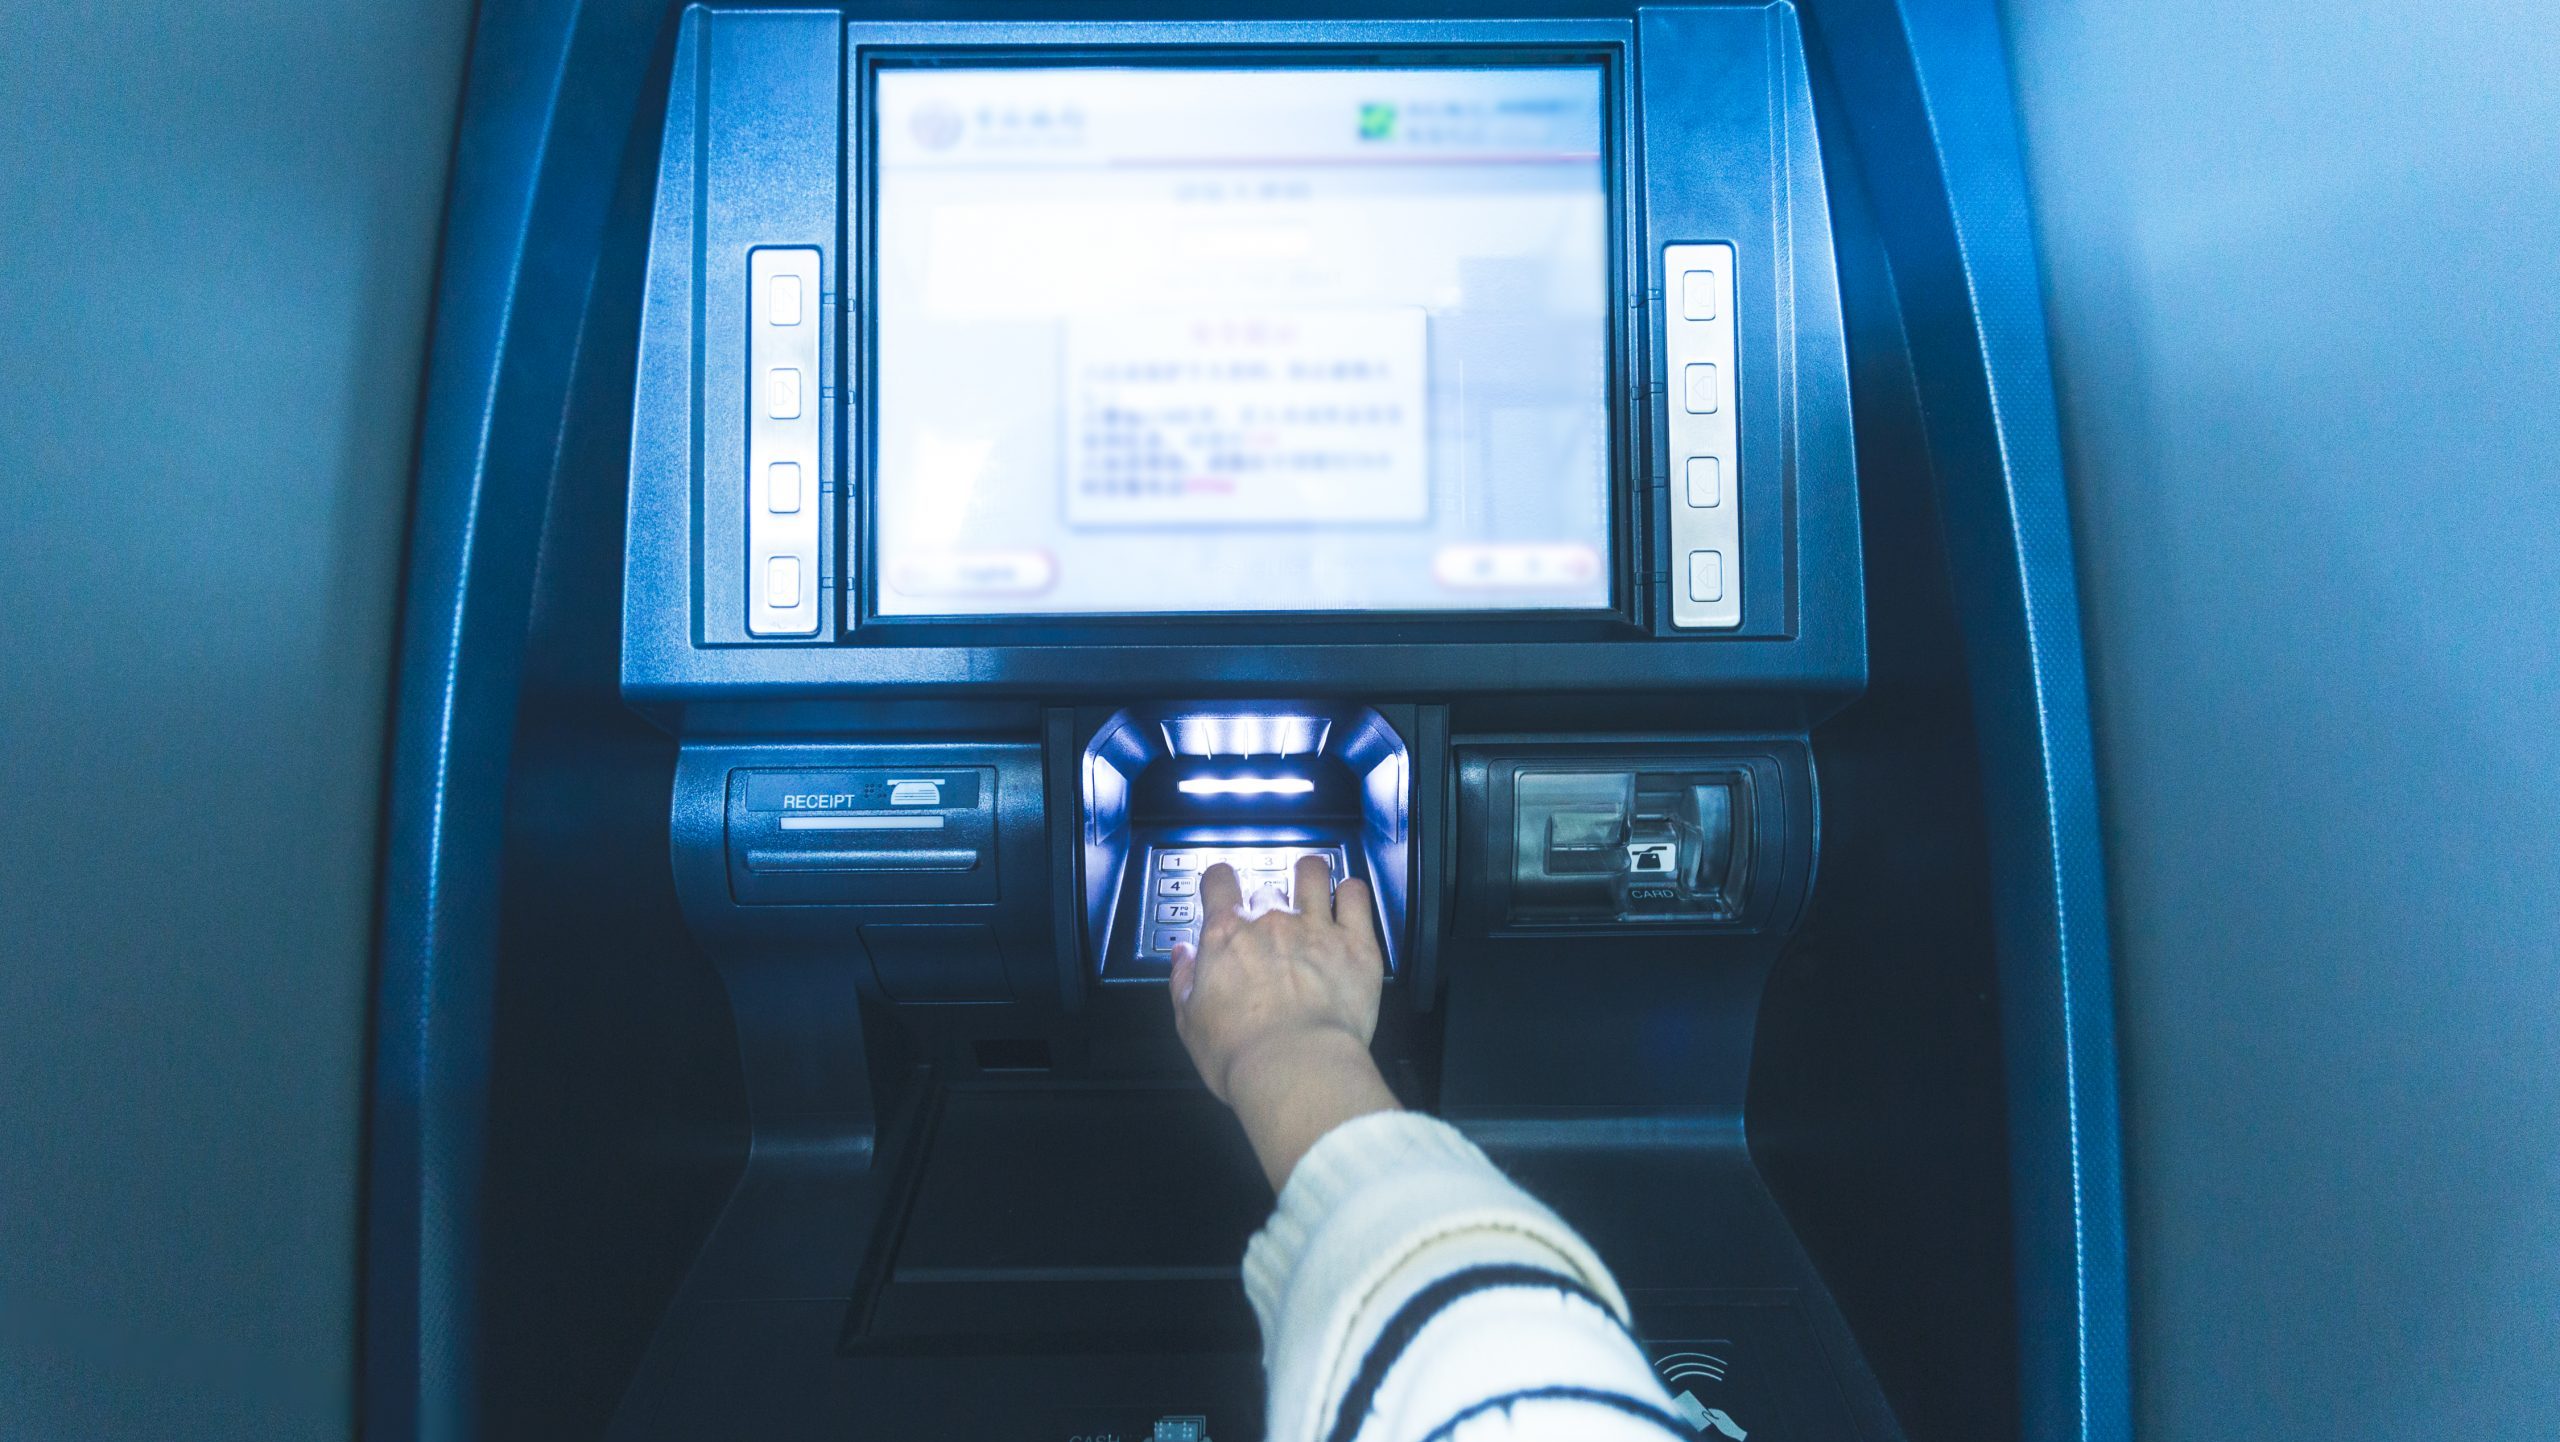 hand typing passcode on an atm